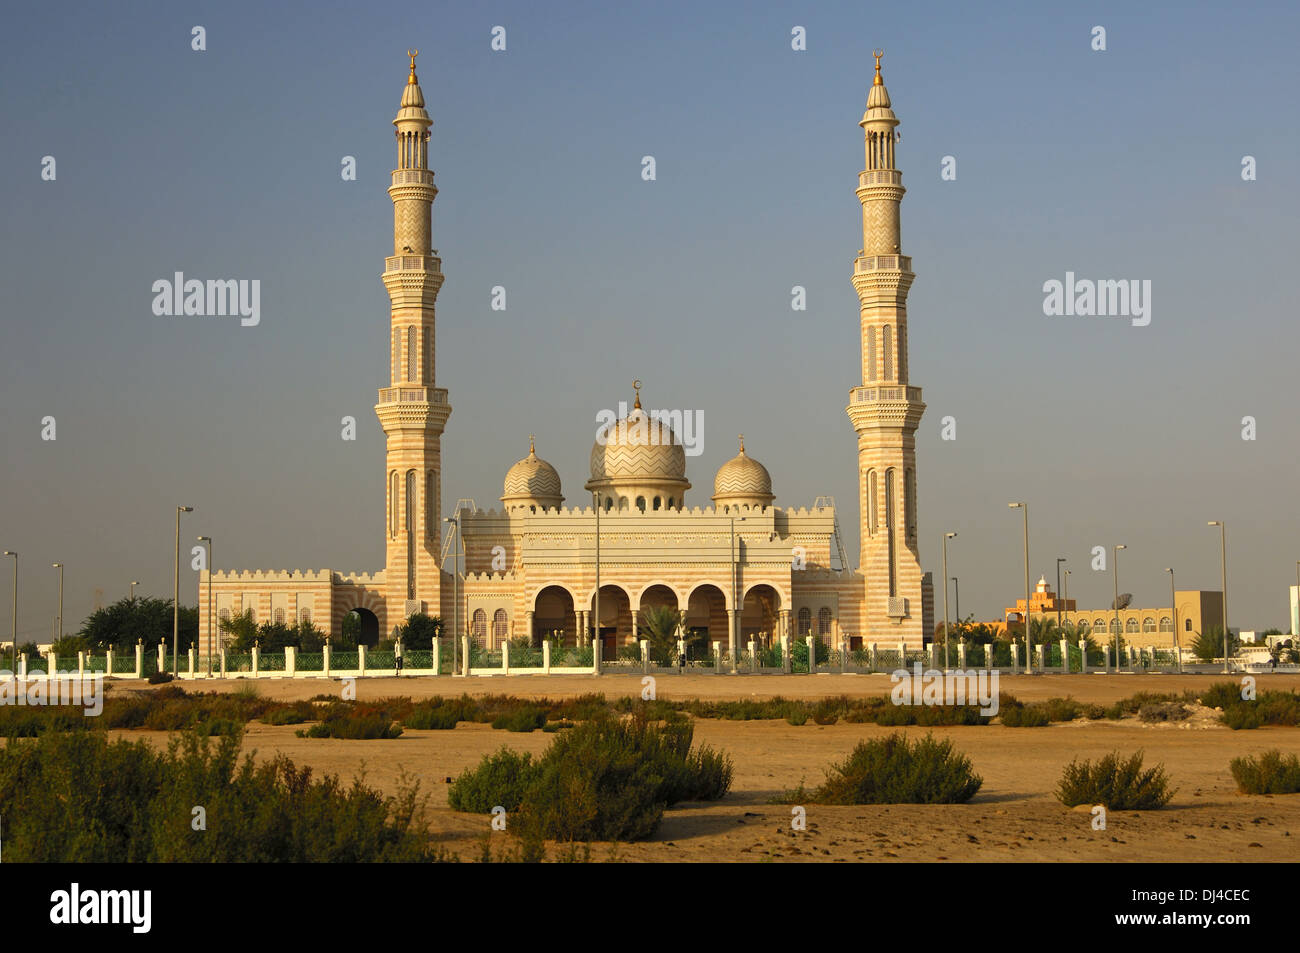 Mosque with two minarets in Abu Dhabi Stock Photo